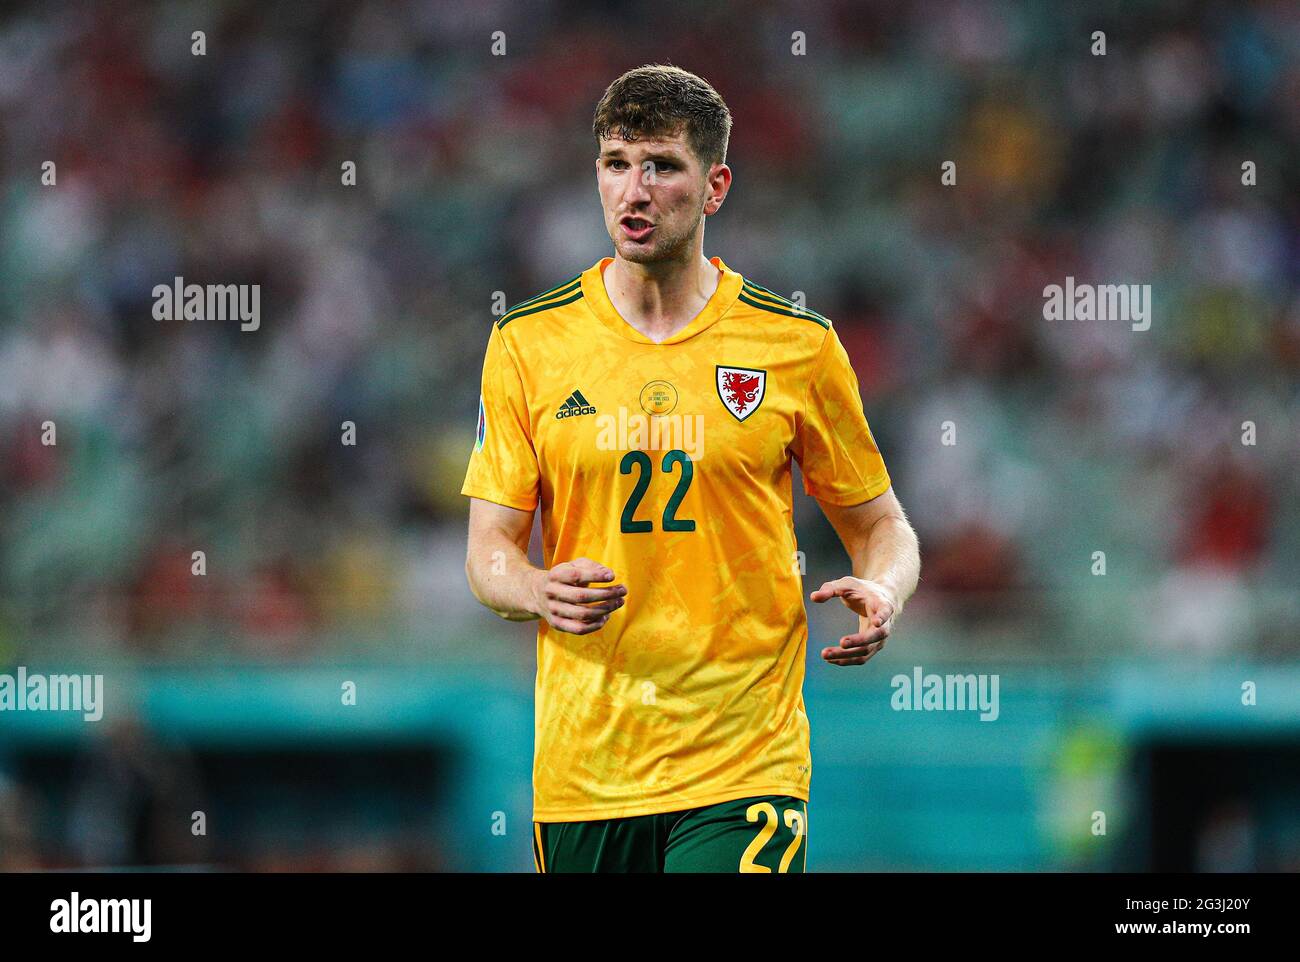 Chris Mepham of Wales during the UEFA Euro 2020 Group A match at the Baku Olympic Stadium in Azerbaijan. Picture date: Wednesday June 16, 2021. Stock Photo